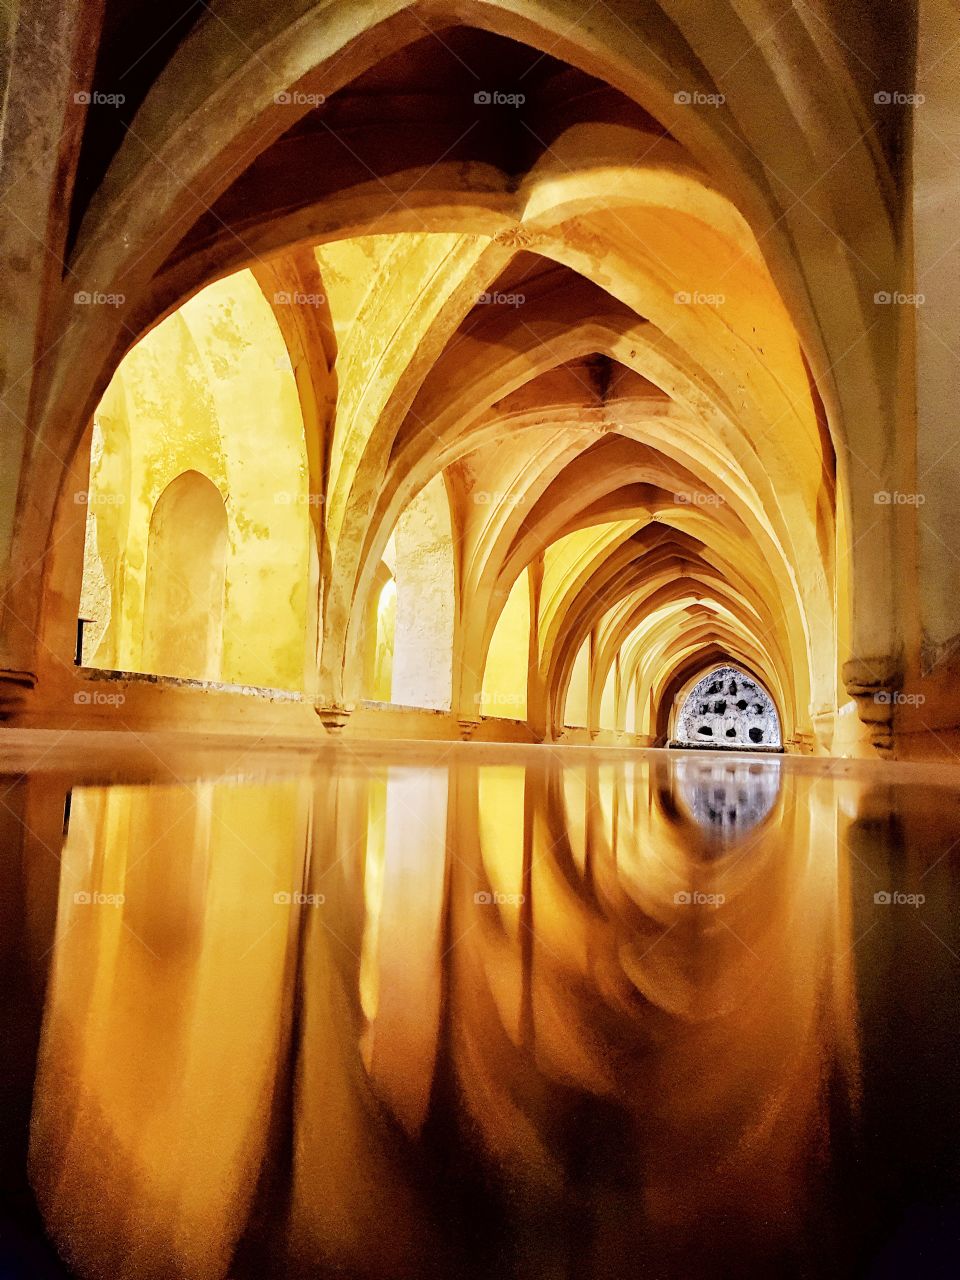 water reflection of arches